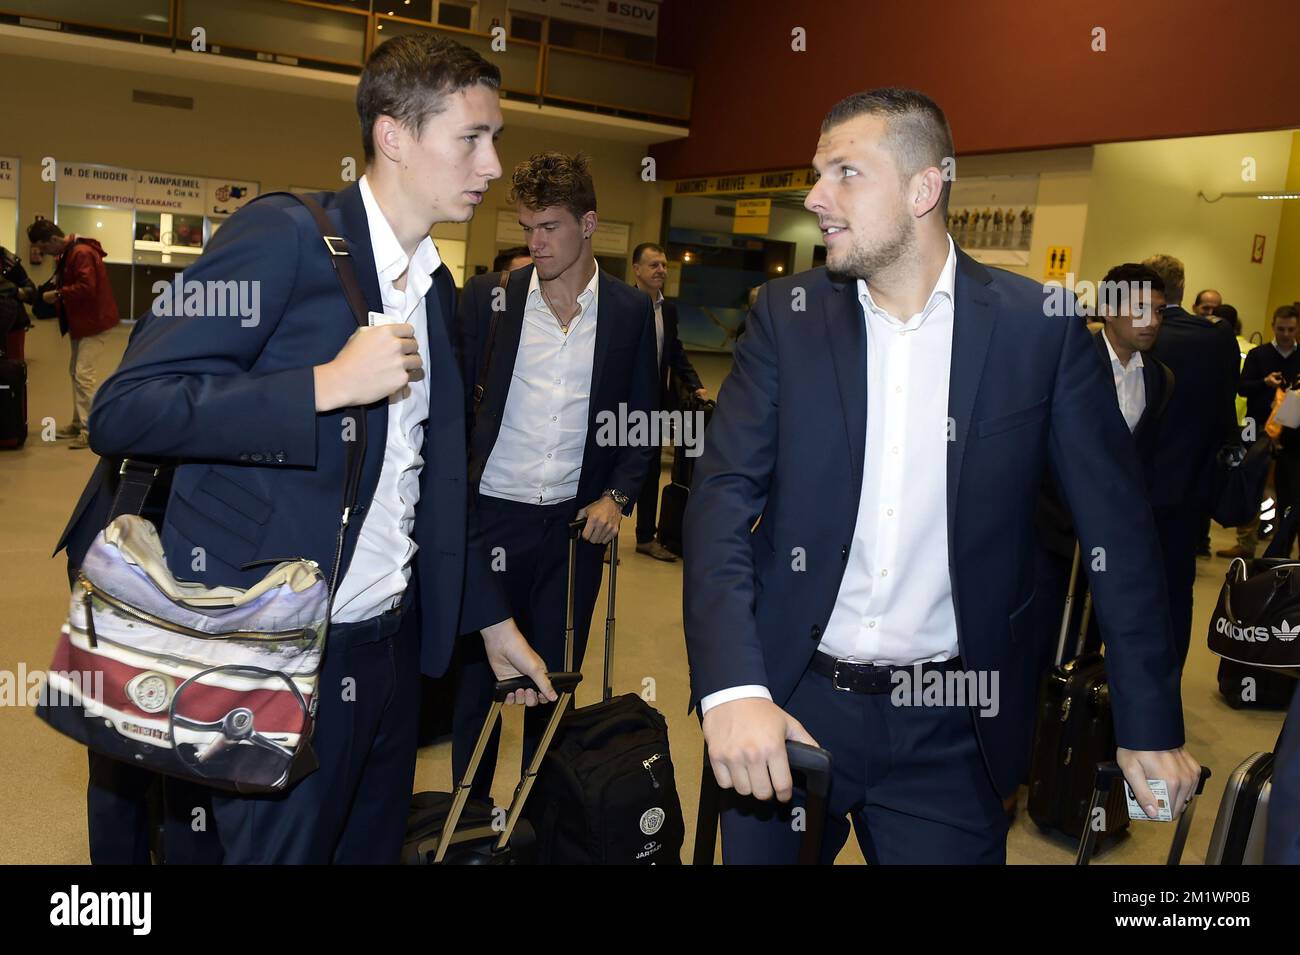 20141022 - OOSTENDE, BELGIUM: Lokeren's Hans Vanaken and Lokeren's goalkeeper Davino Verhulst pictured at the departure of Belgian soccer team KSC Lokeren OVL in Oostende airport, on the way to Trabzon airport, Wednesday 22 October 2014. Tomorrow Lokeren is playing Turkish club Trabzonspor AS in the third day of the group stage of the UEFA Europa League competition, in the group L. BELGA PHOTO YORICK JANSENS Stock Photo